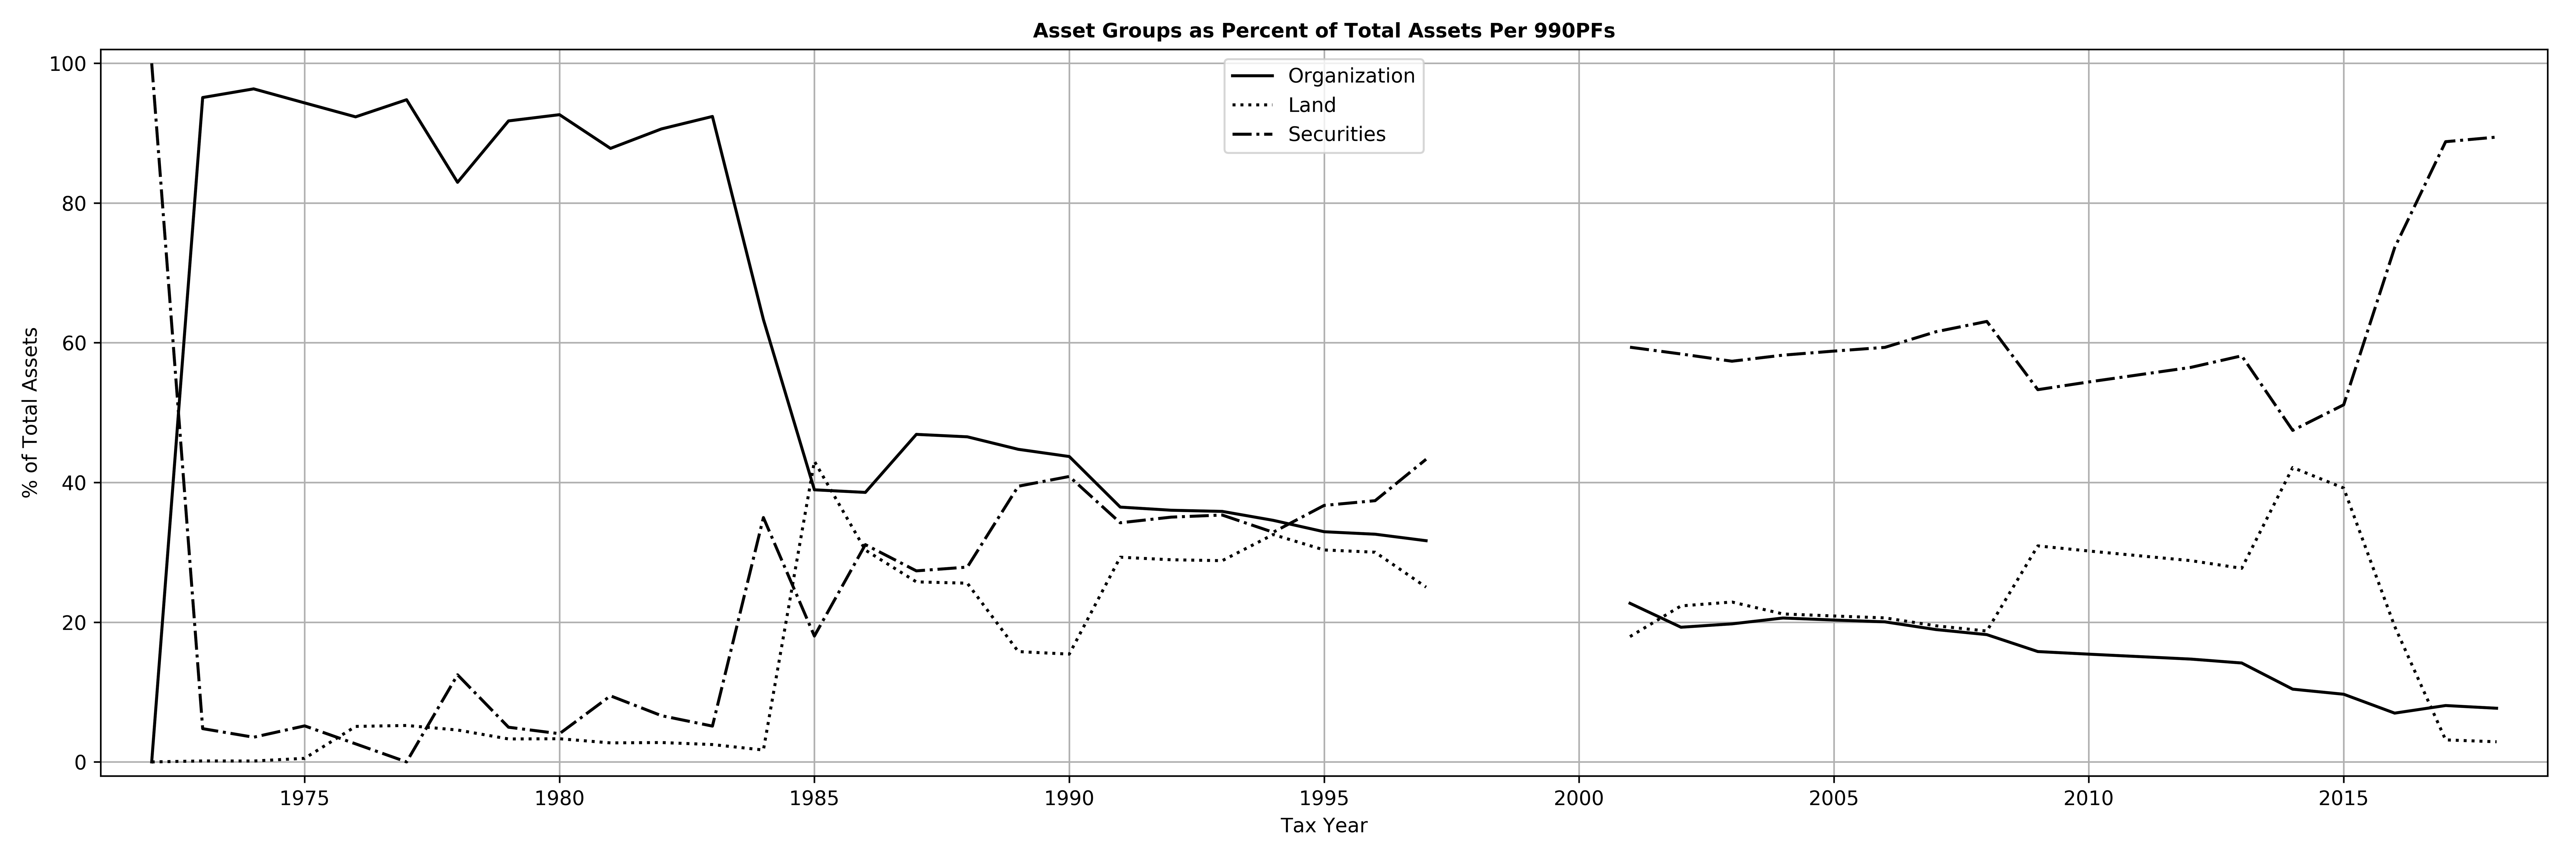 Asset Groups as Percent of Assets